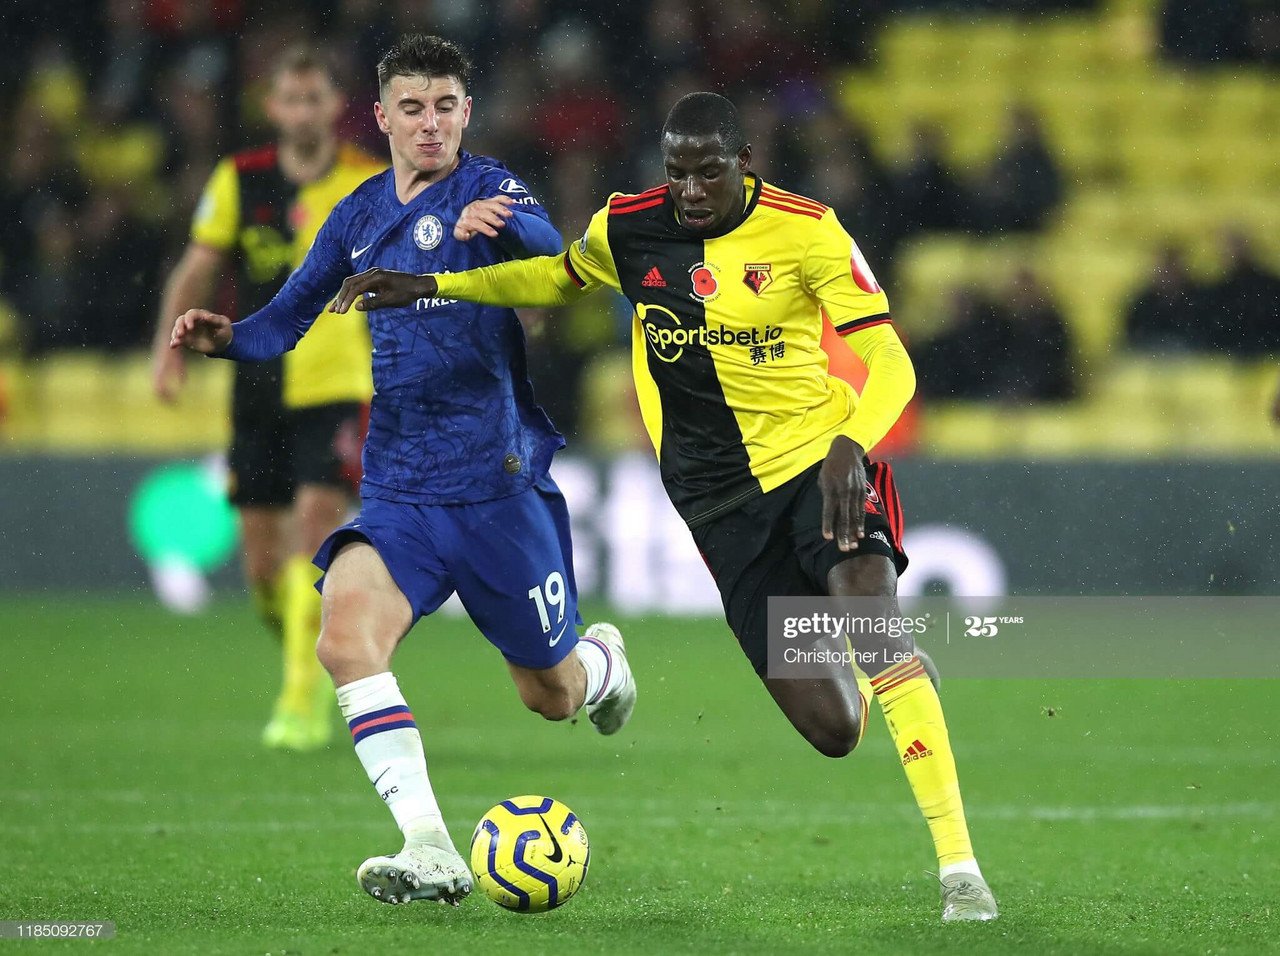 Chelsea vs Watford Preview: Can Blues bounce back from midweek disappointment?